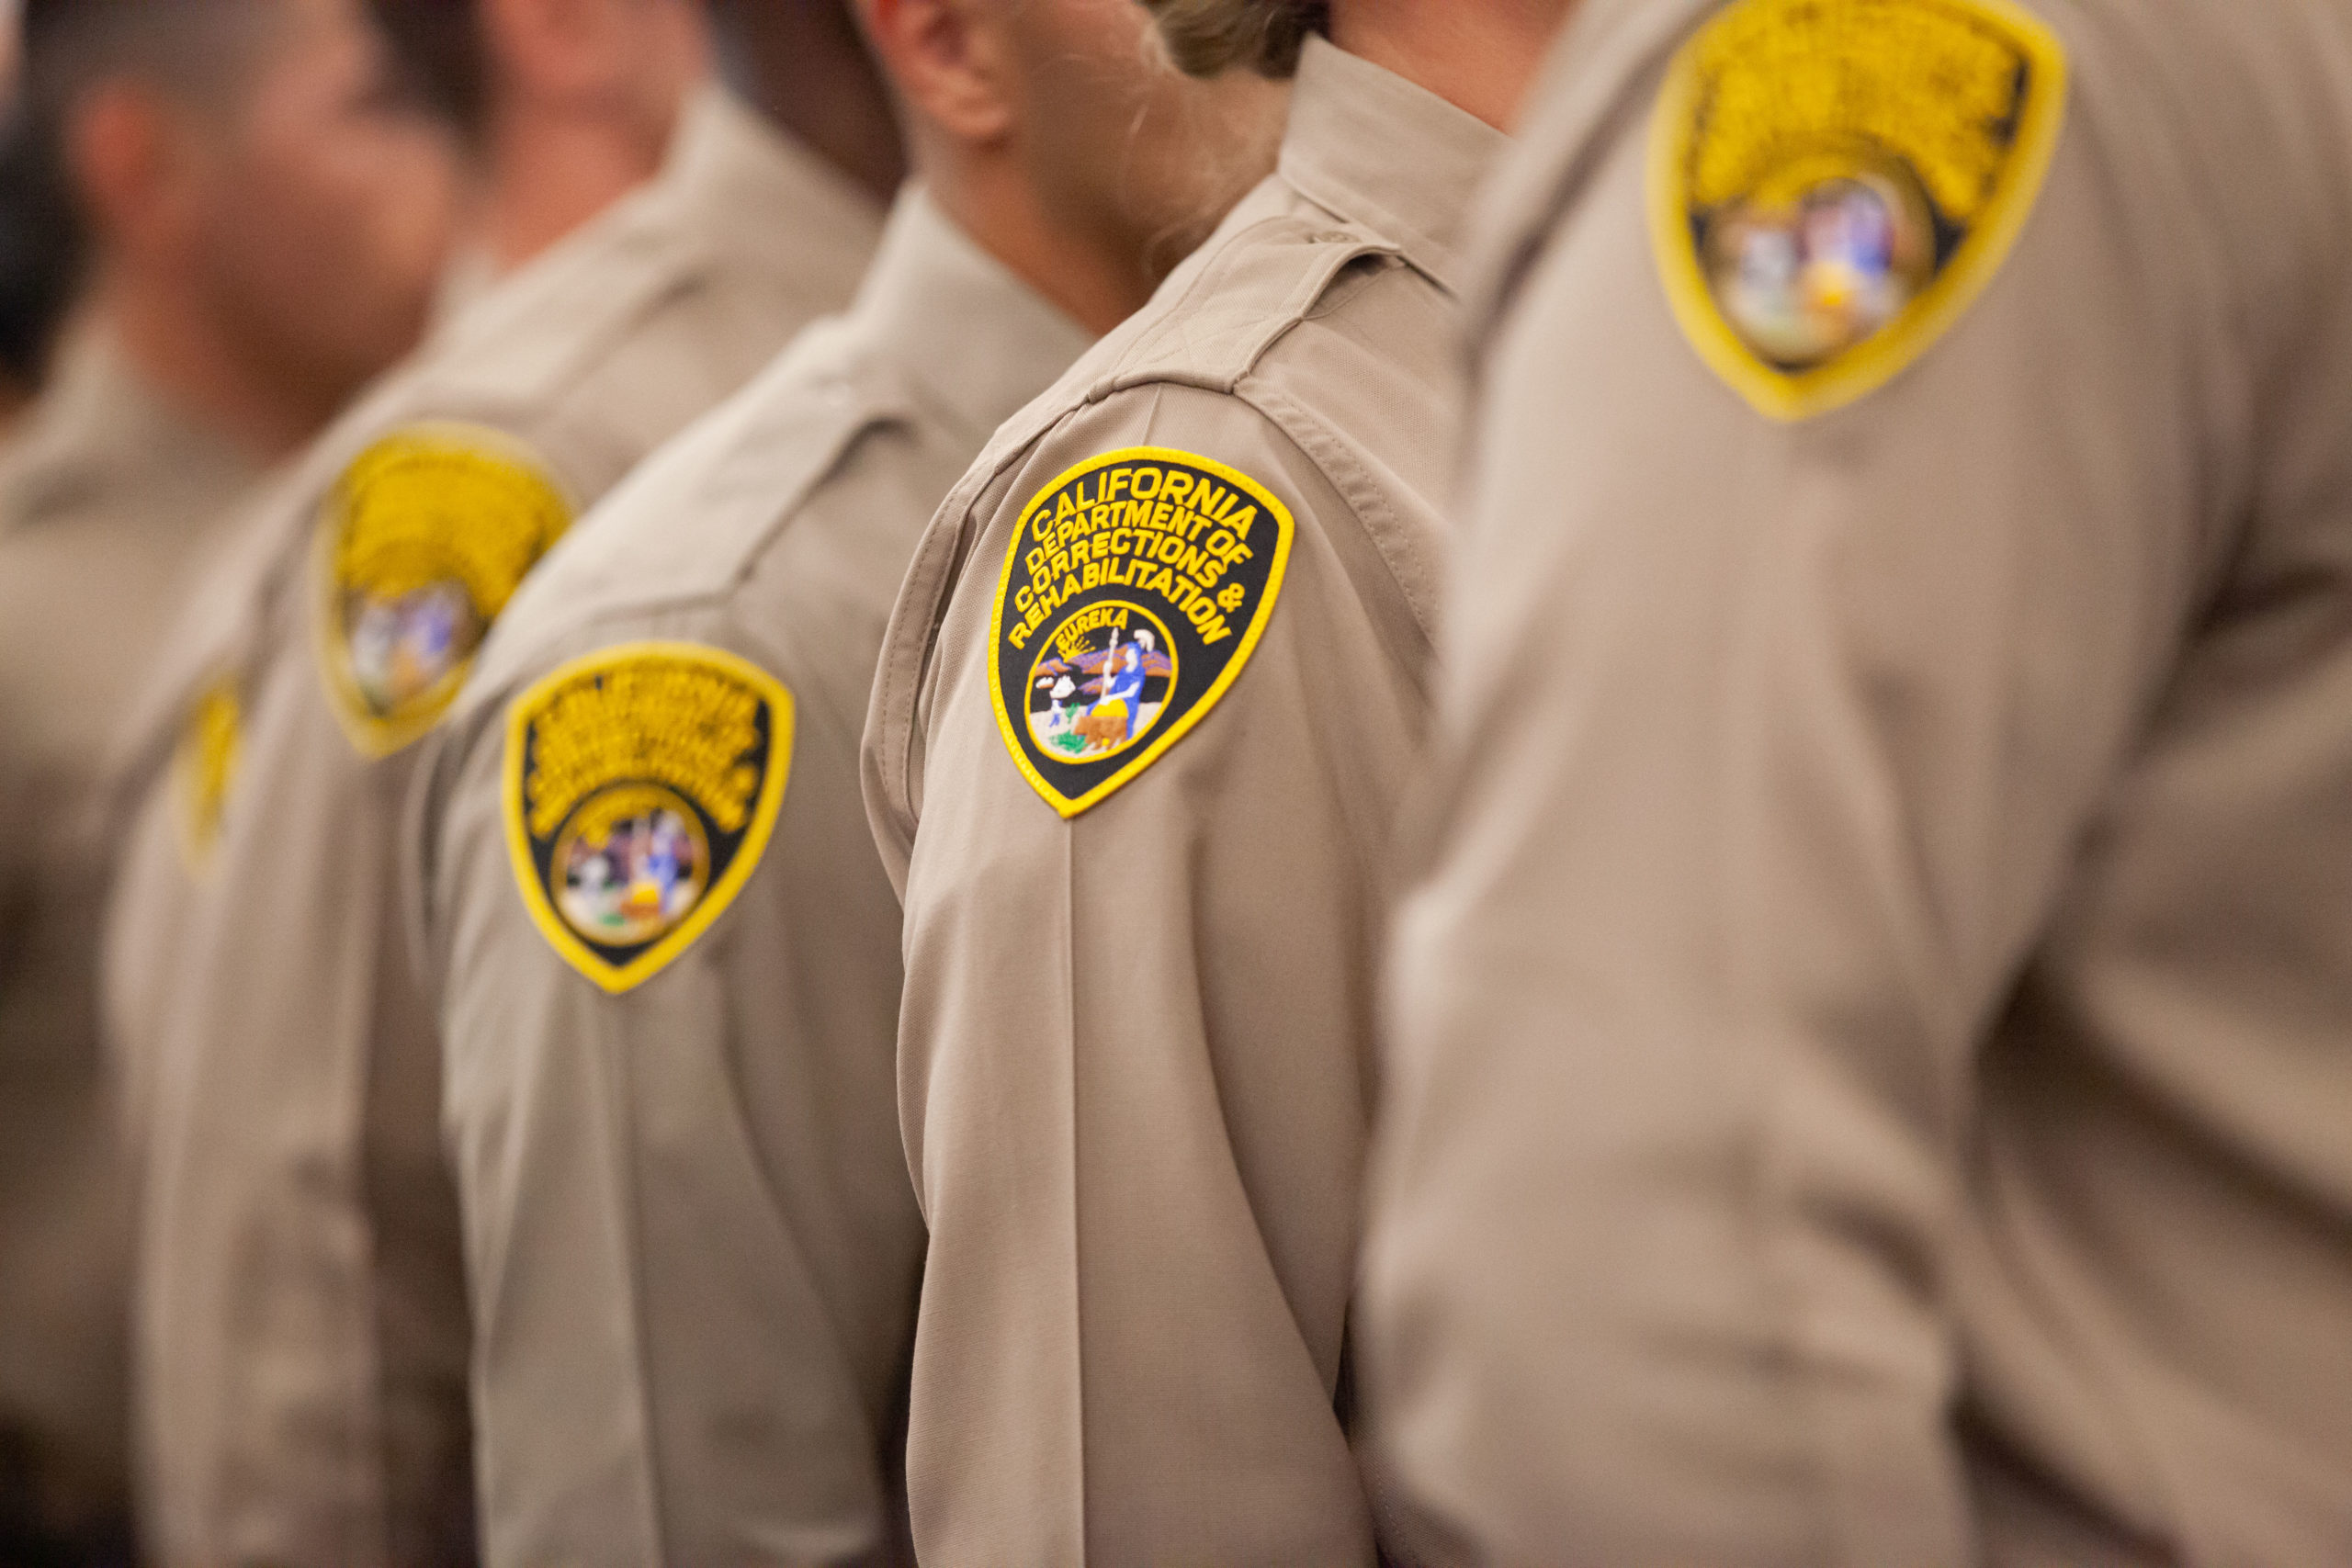 Newly sworn CDCR Officers standing in formation at a graduation ceremony.